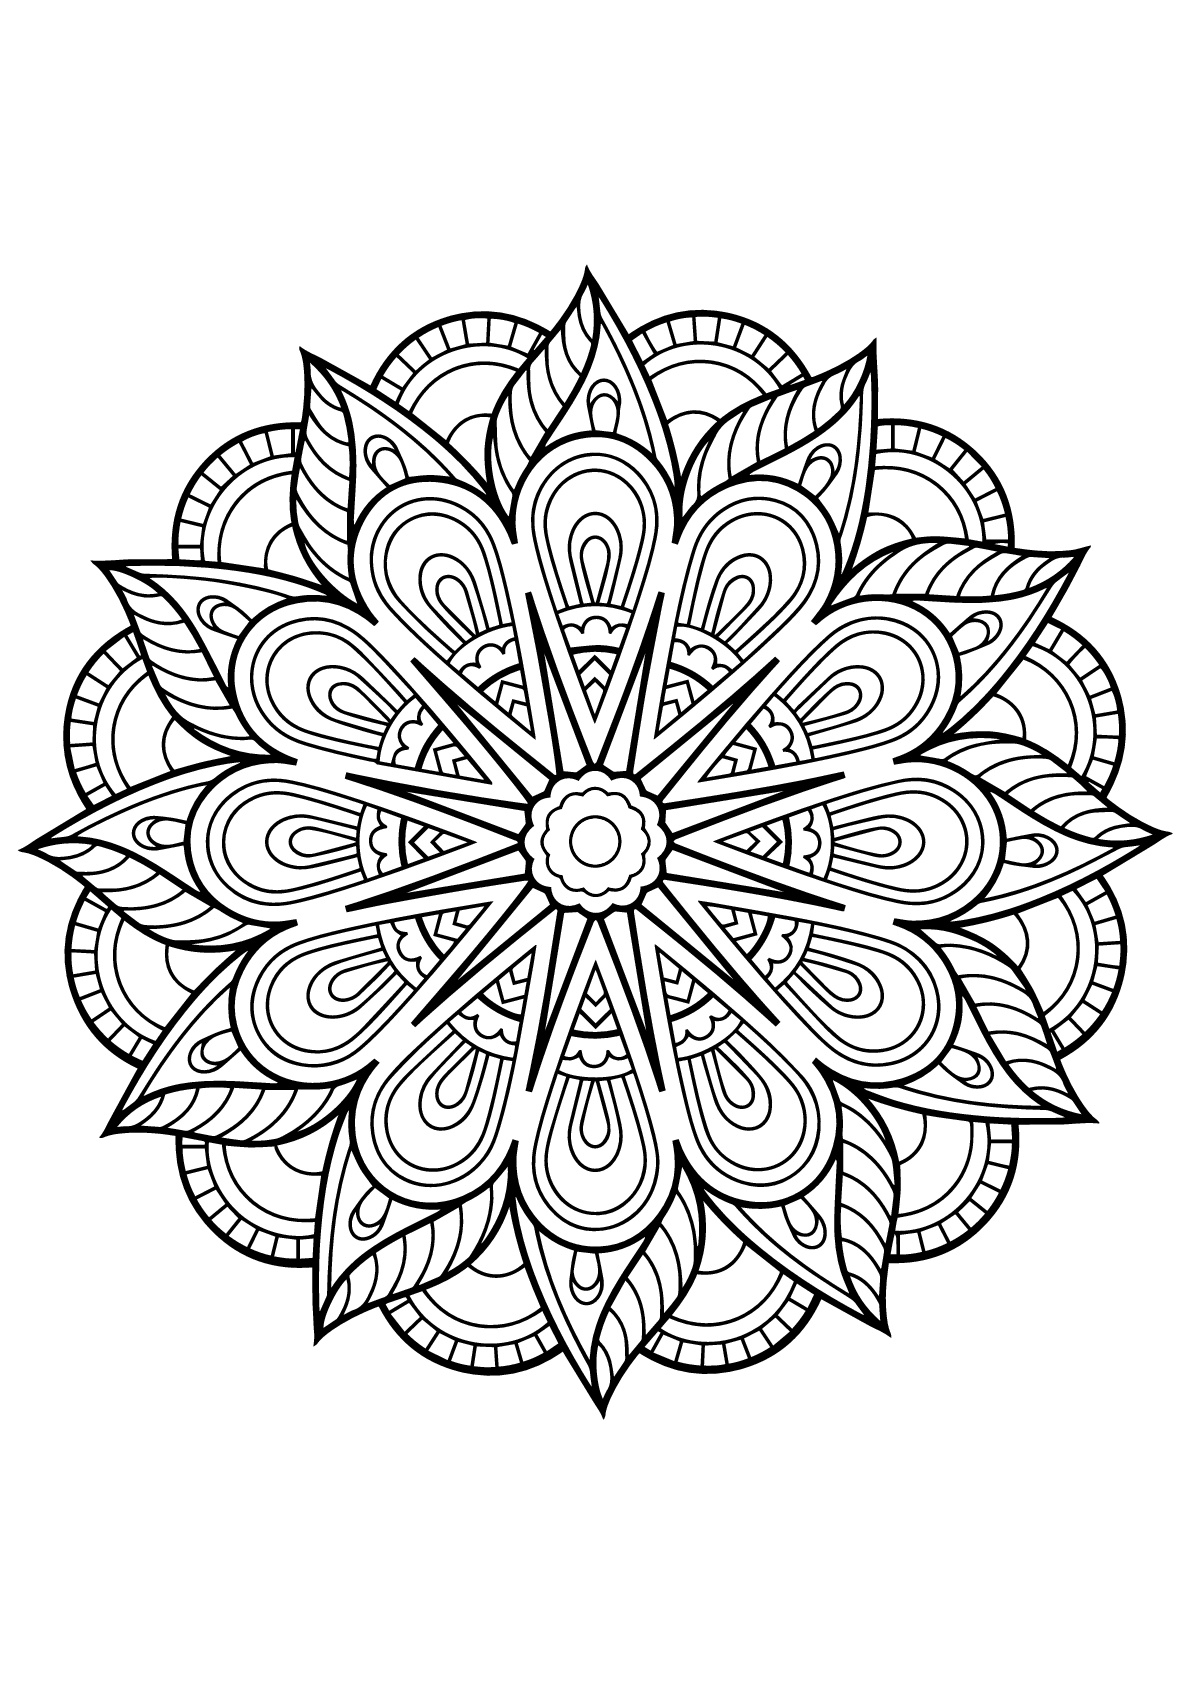 Incredible Mandala from Free Coloring book for adults